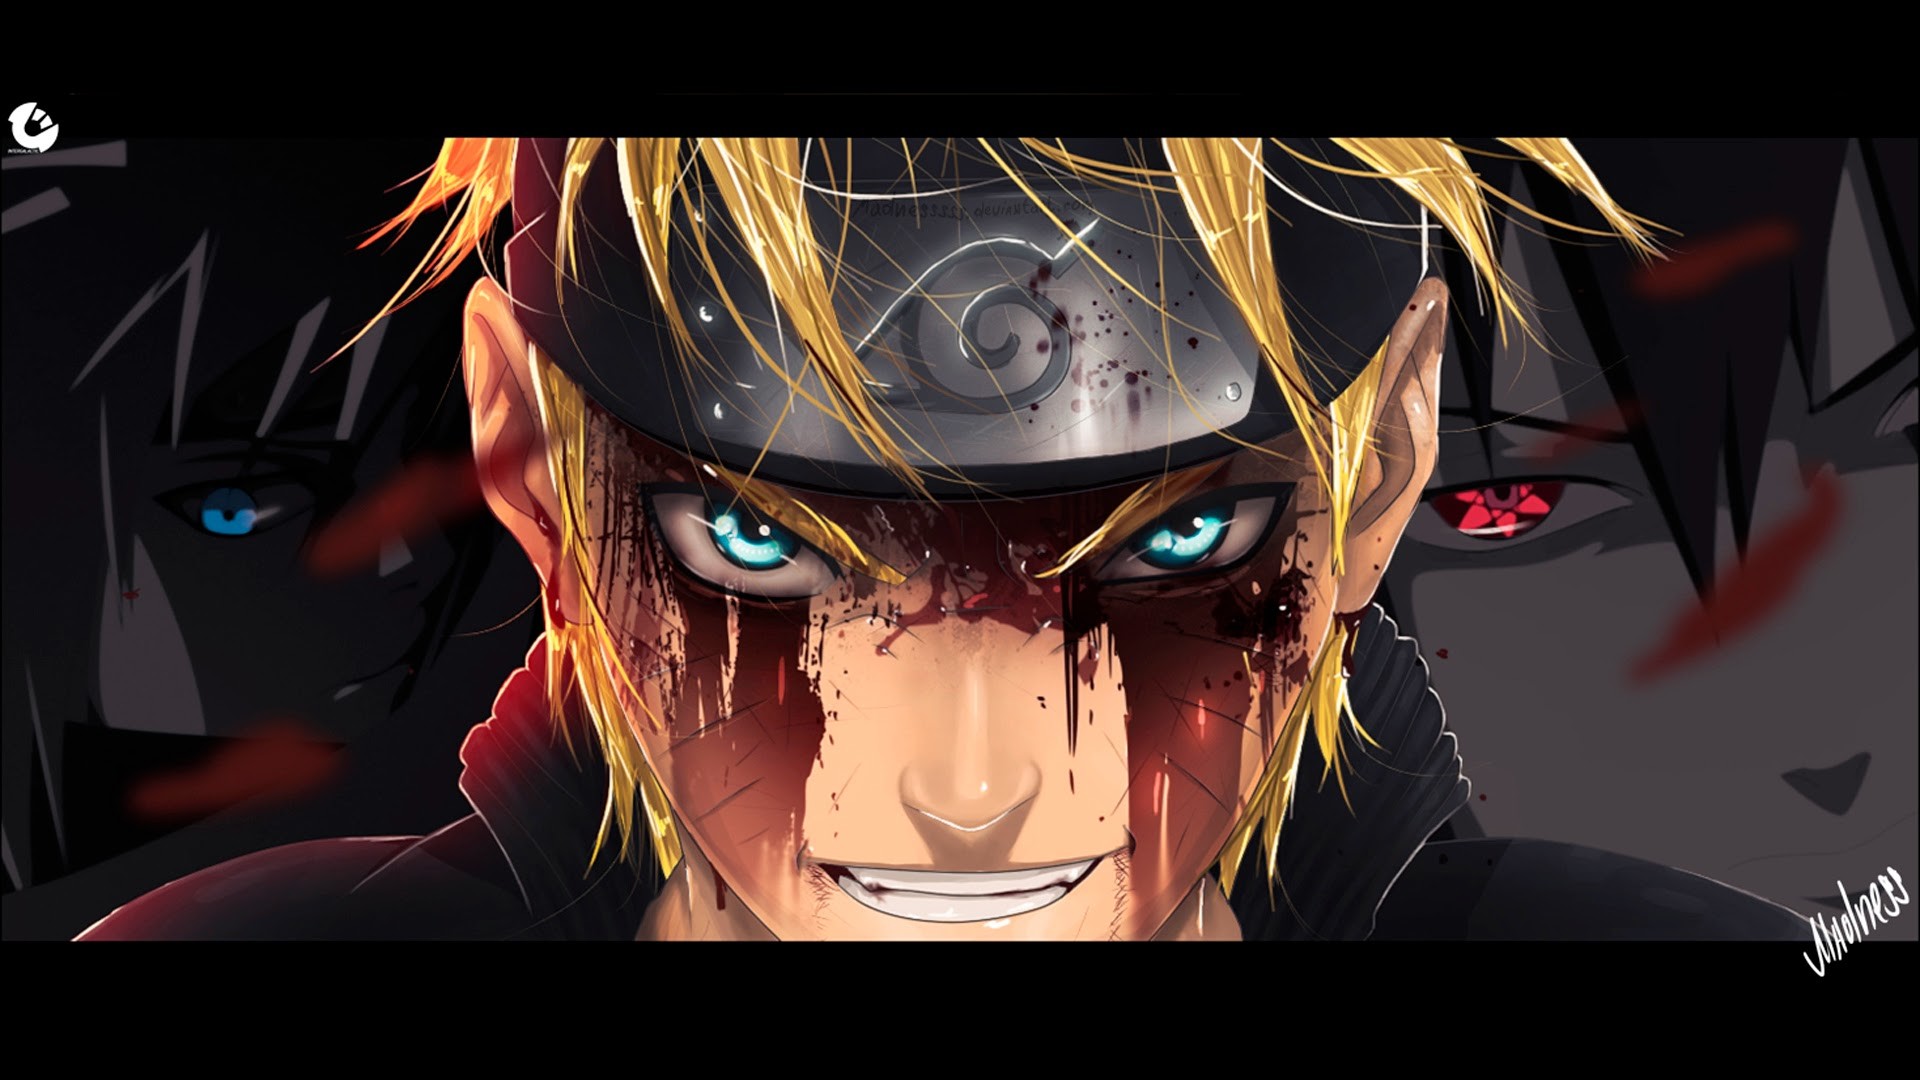 1920x1080 ... Free Naruto Shippuden Wallpapers HD | HD Wallpapers, Backgrounds ...